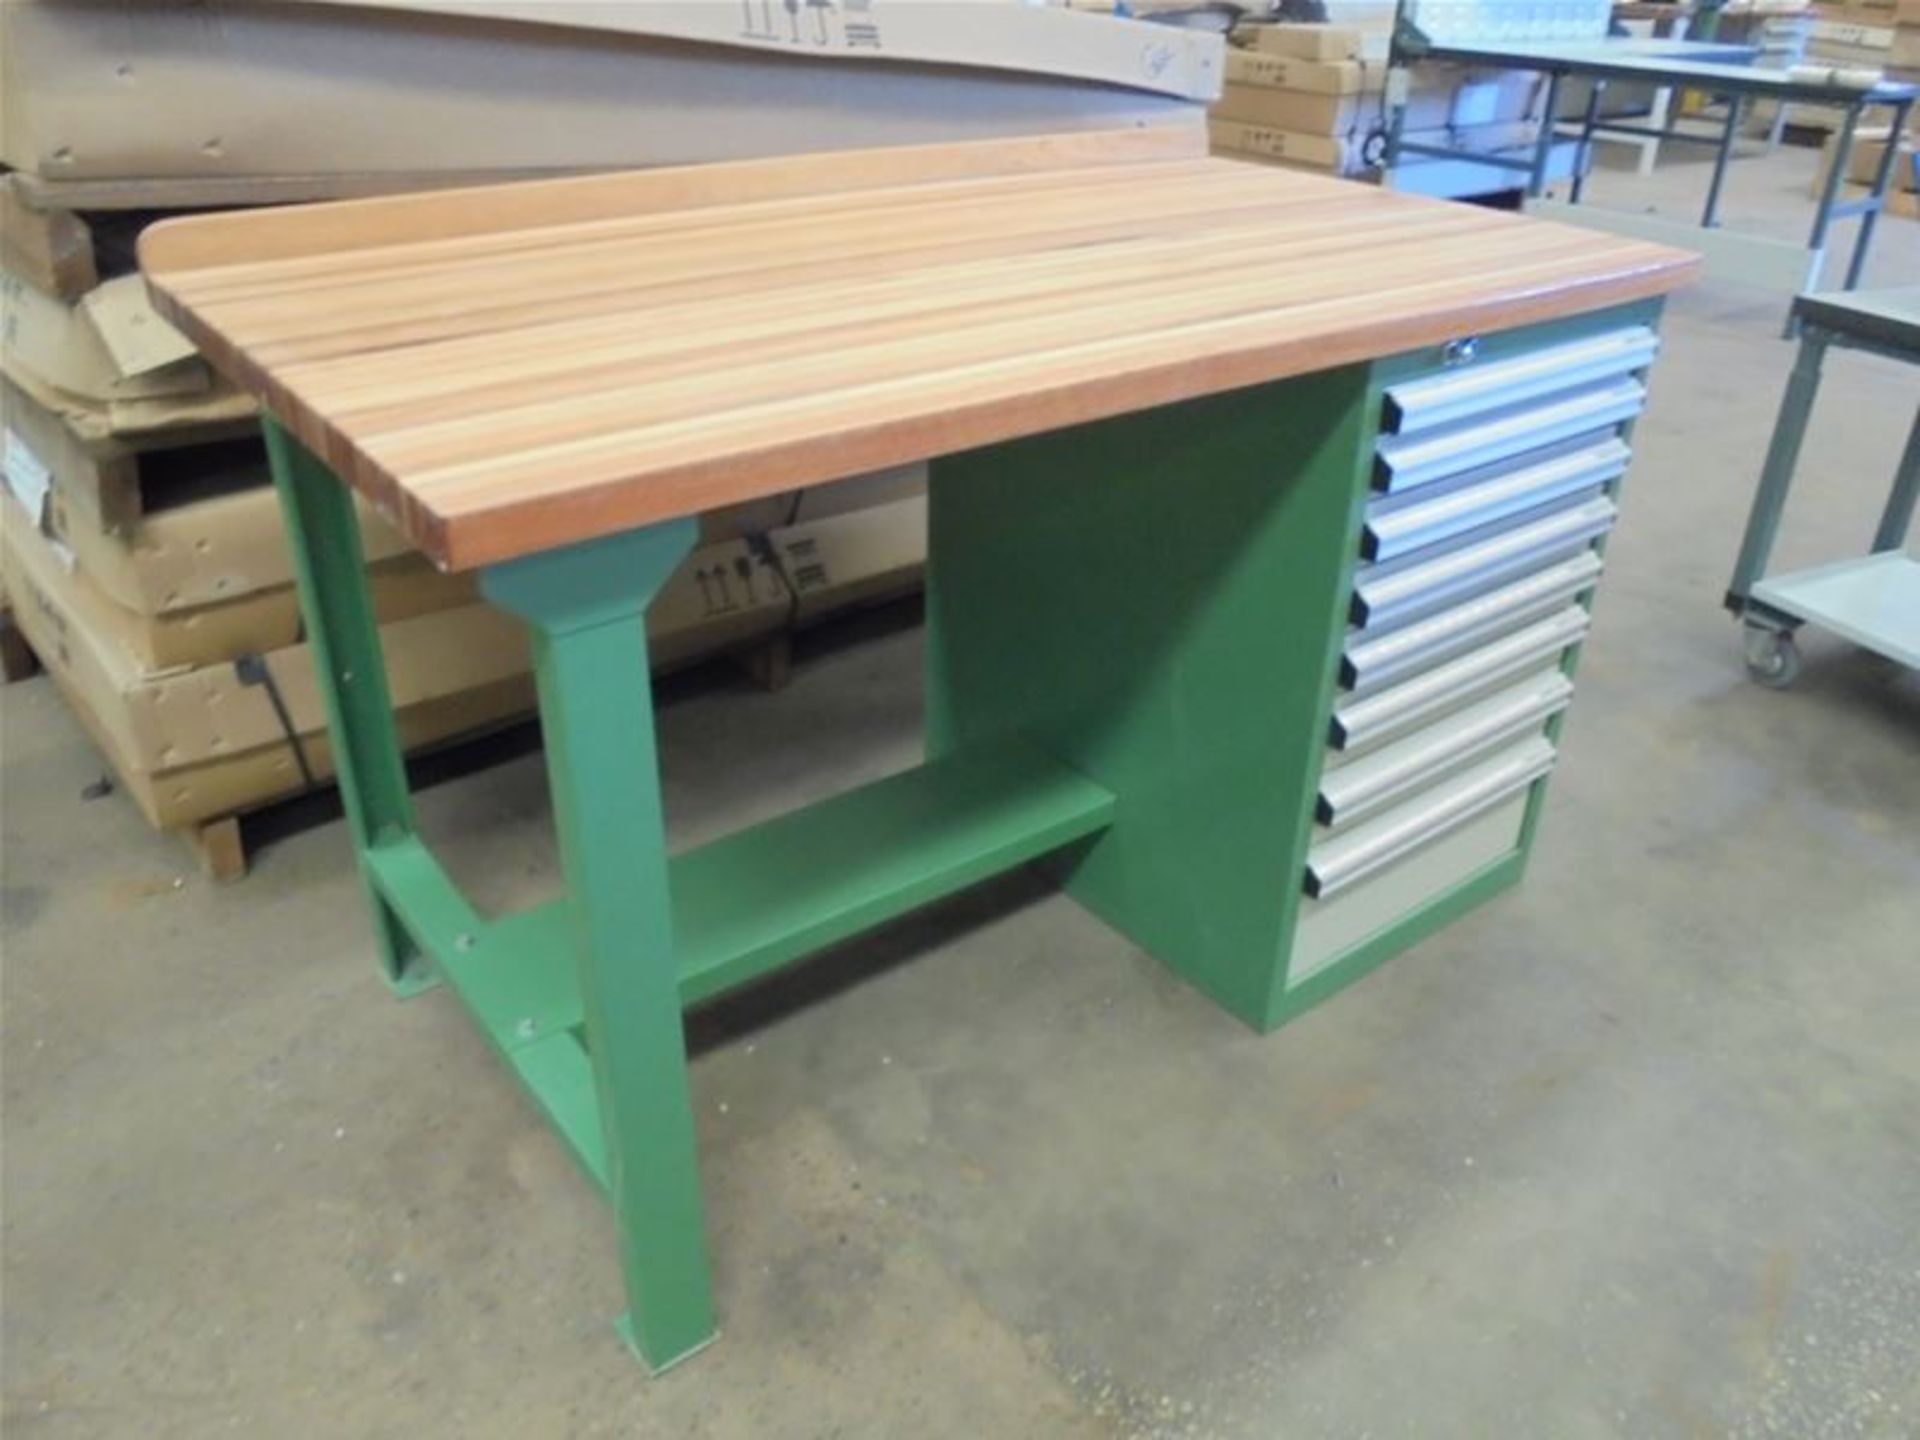 Workbench WKS 500-15T with Saligna Top and C850-8.1 Cabinet Drawer - Image 2 of 3